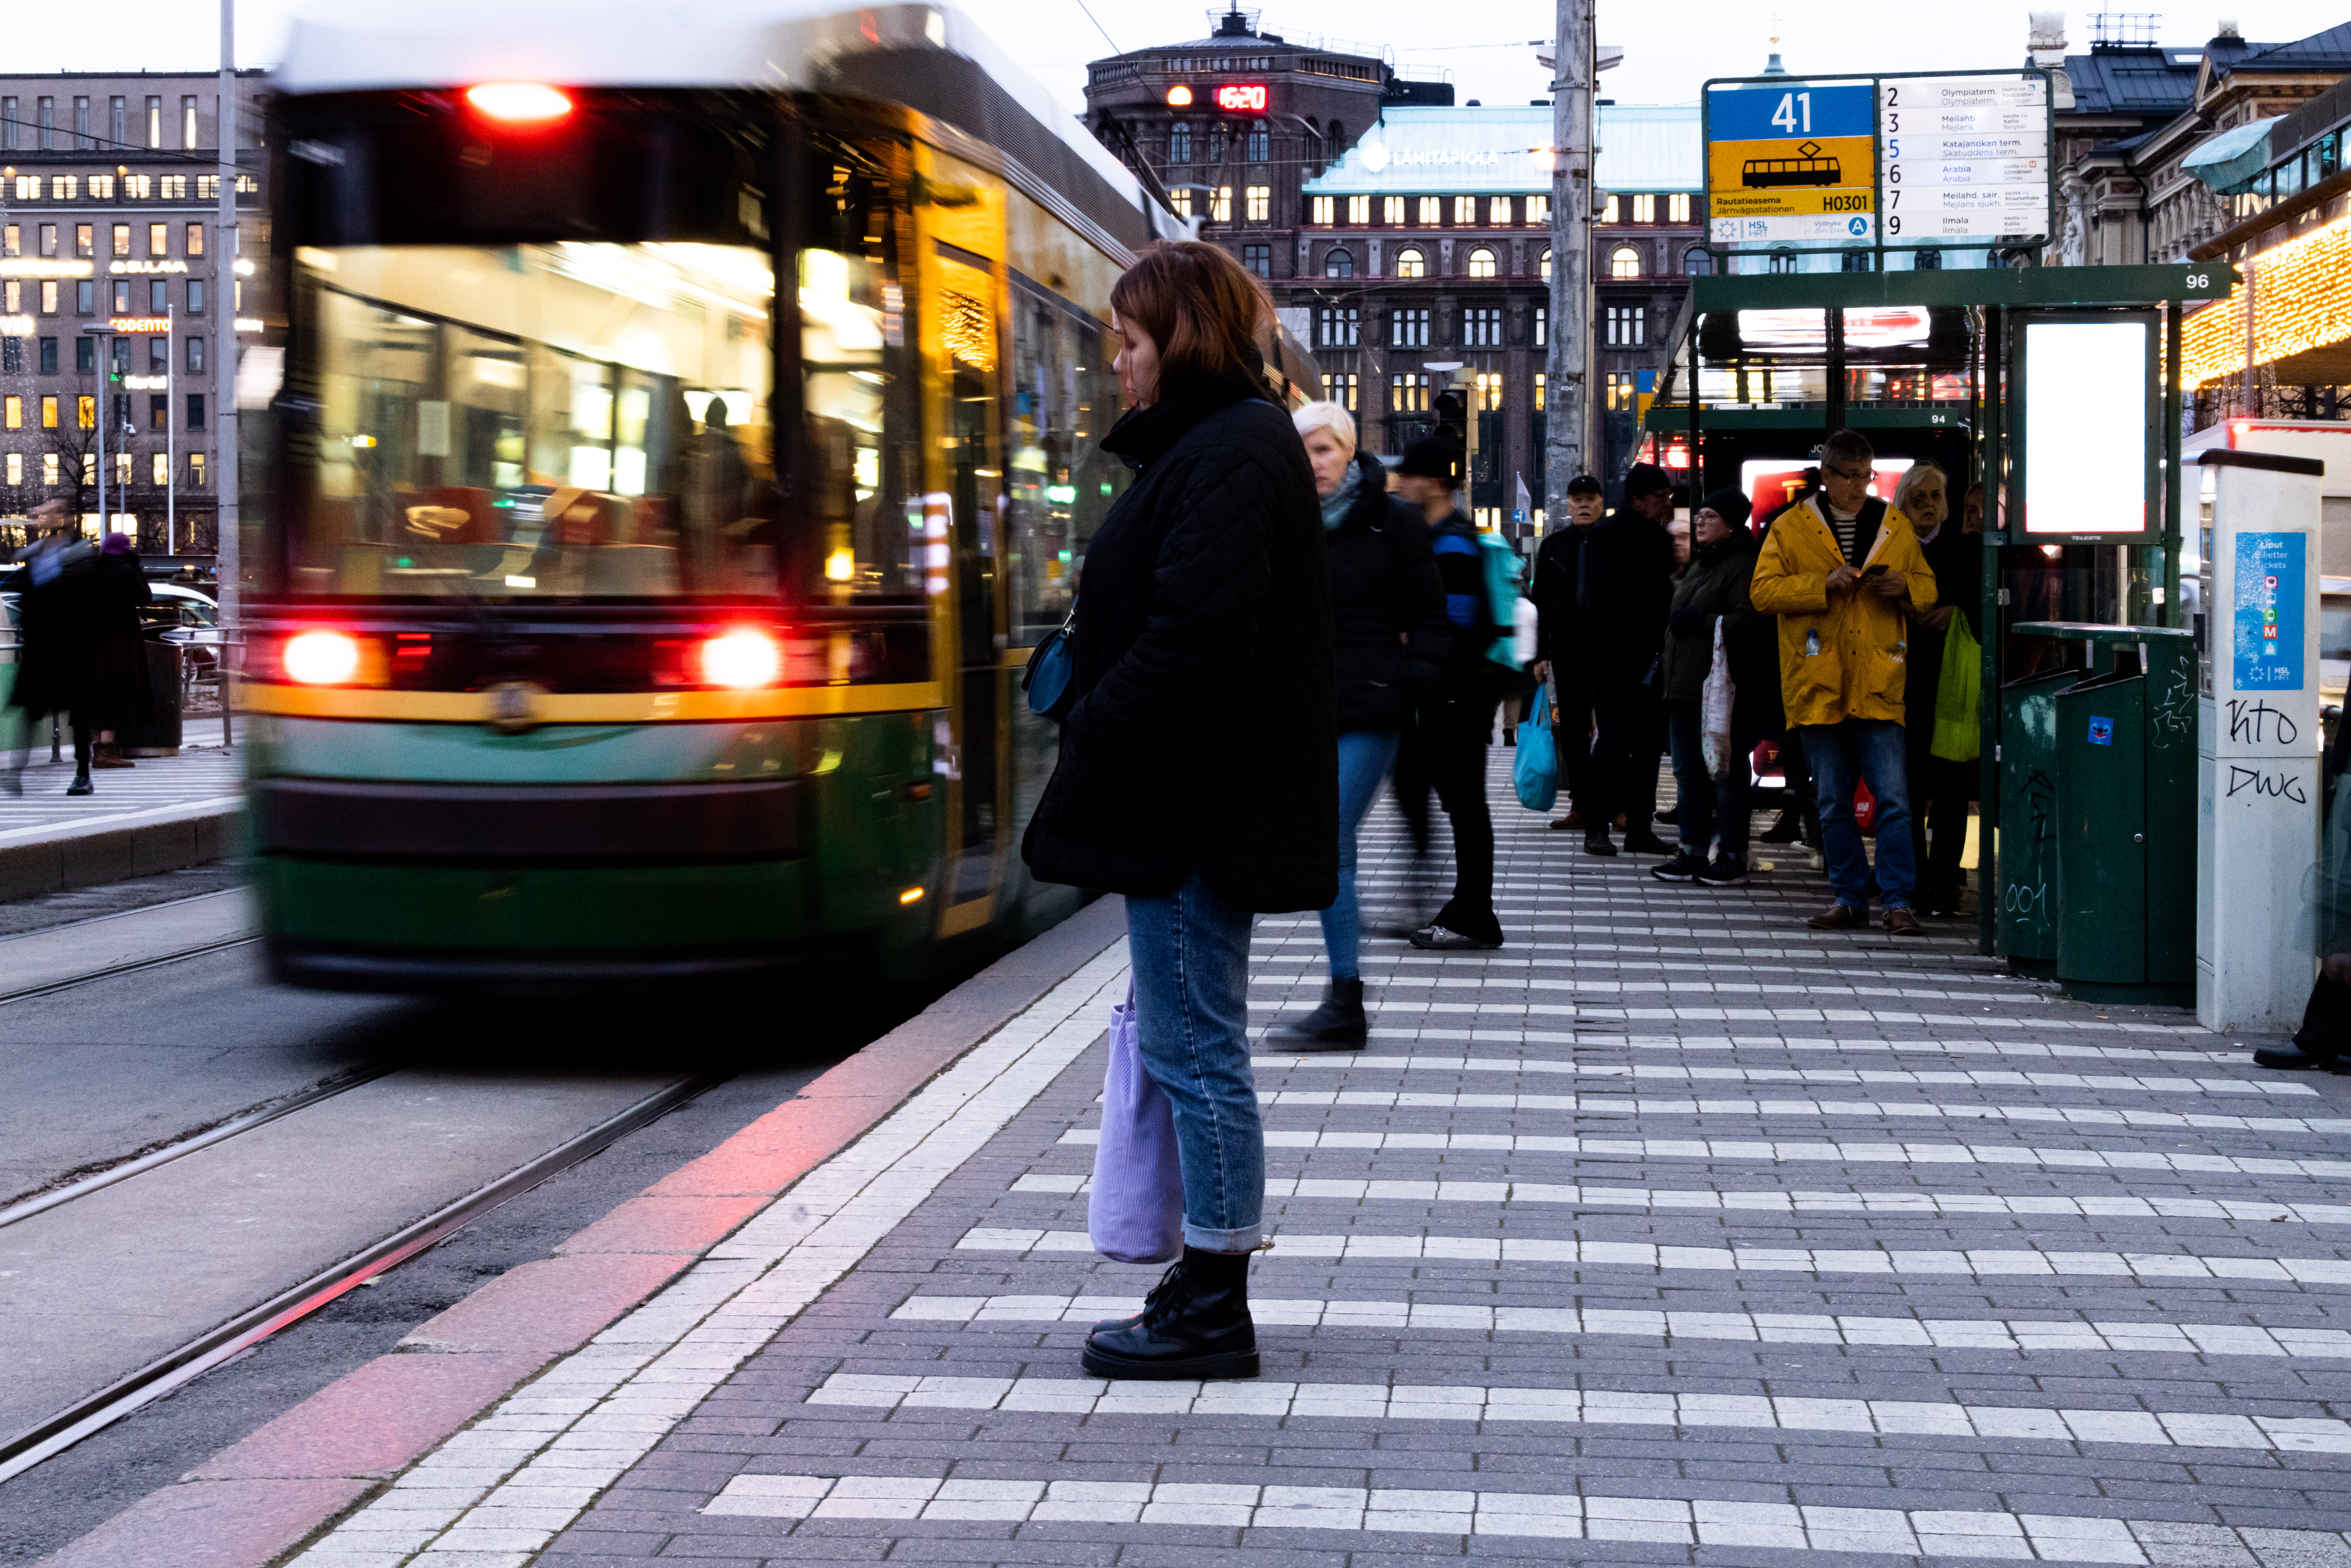 No metro, tram or commuter trains: the impending traffic strike will probably hit the Helsinki region